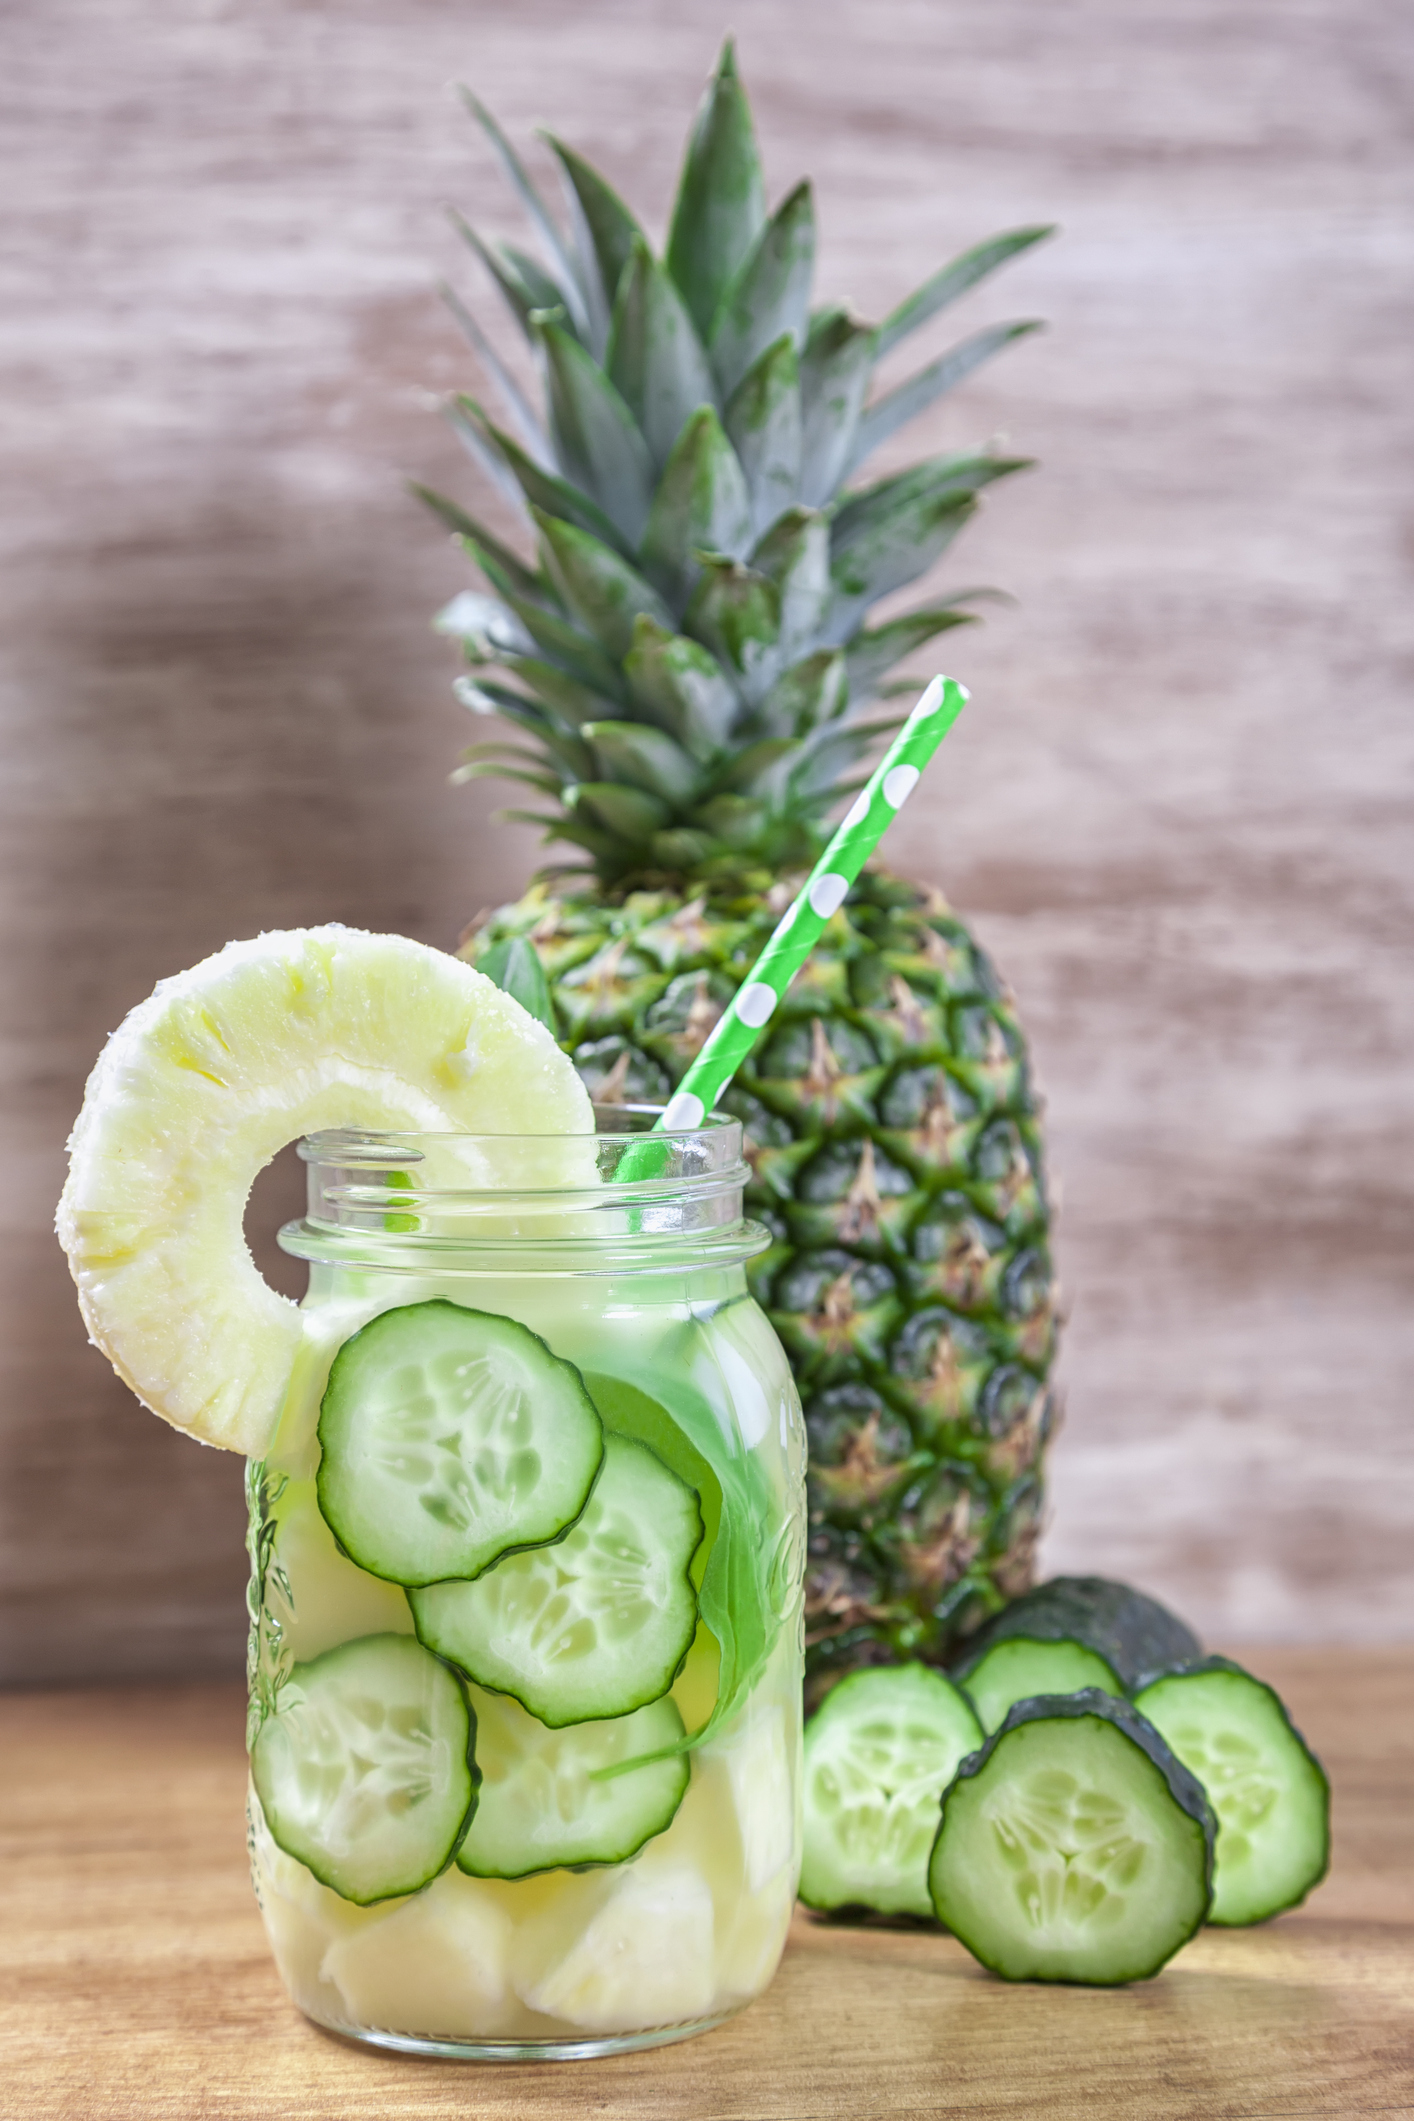 Pineapple and Cucumber Juice